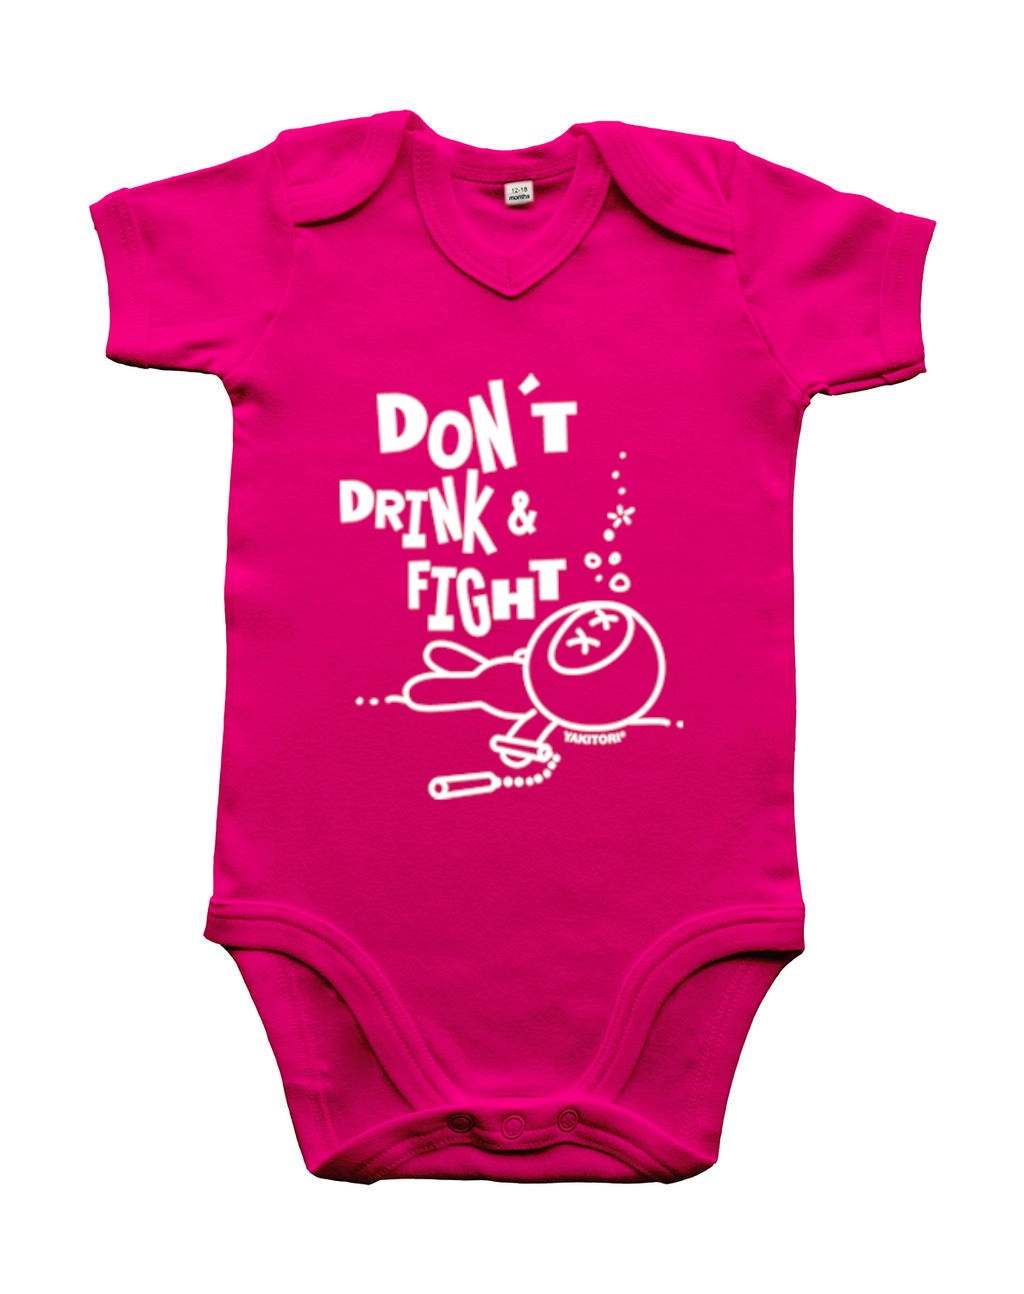 Baby Body pink Ninja - Don't drink and fight